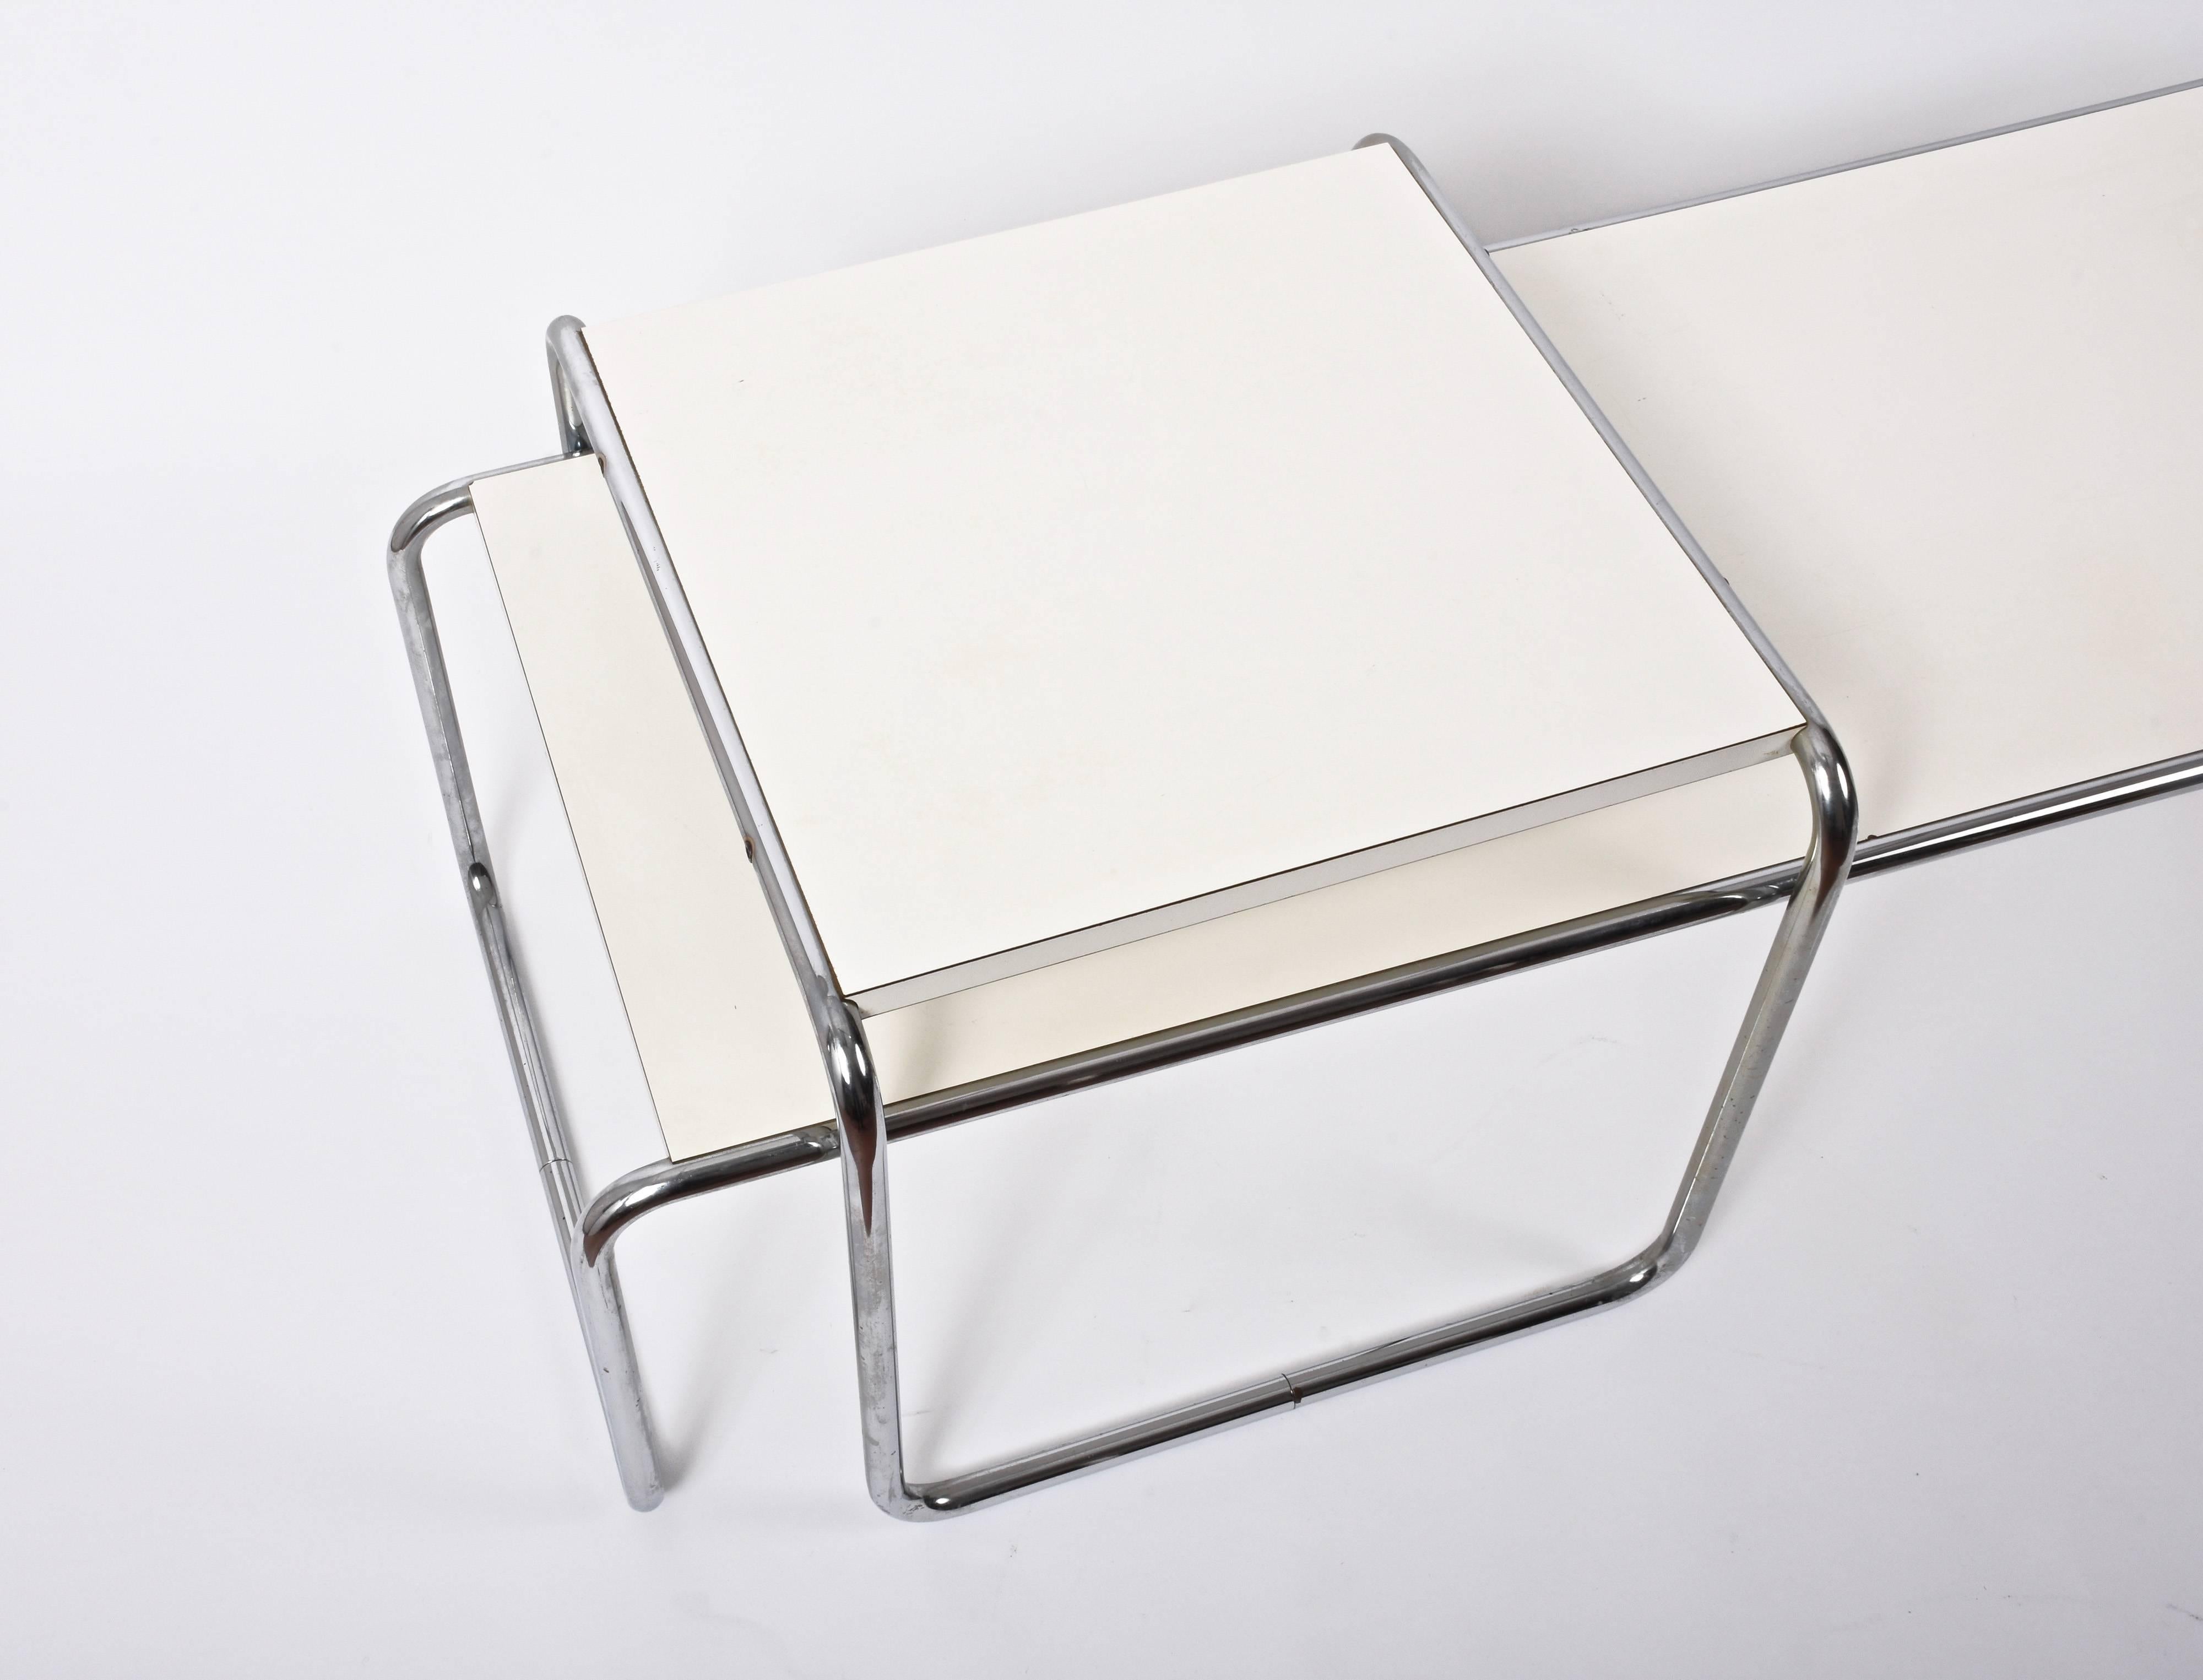 20th Century Marcel Breuer White Laminated Wood and Steel 'Laccio' Side Table, Bauhaus